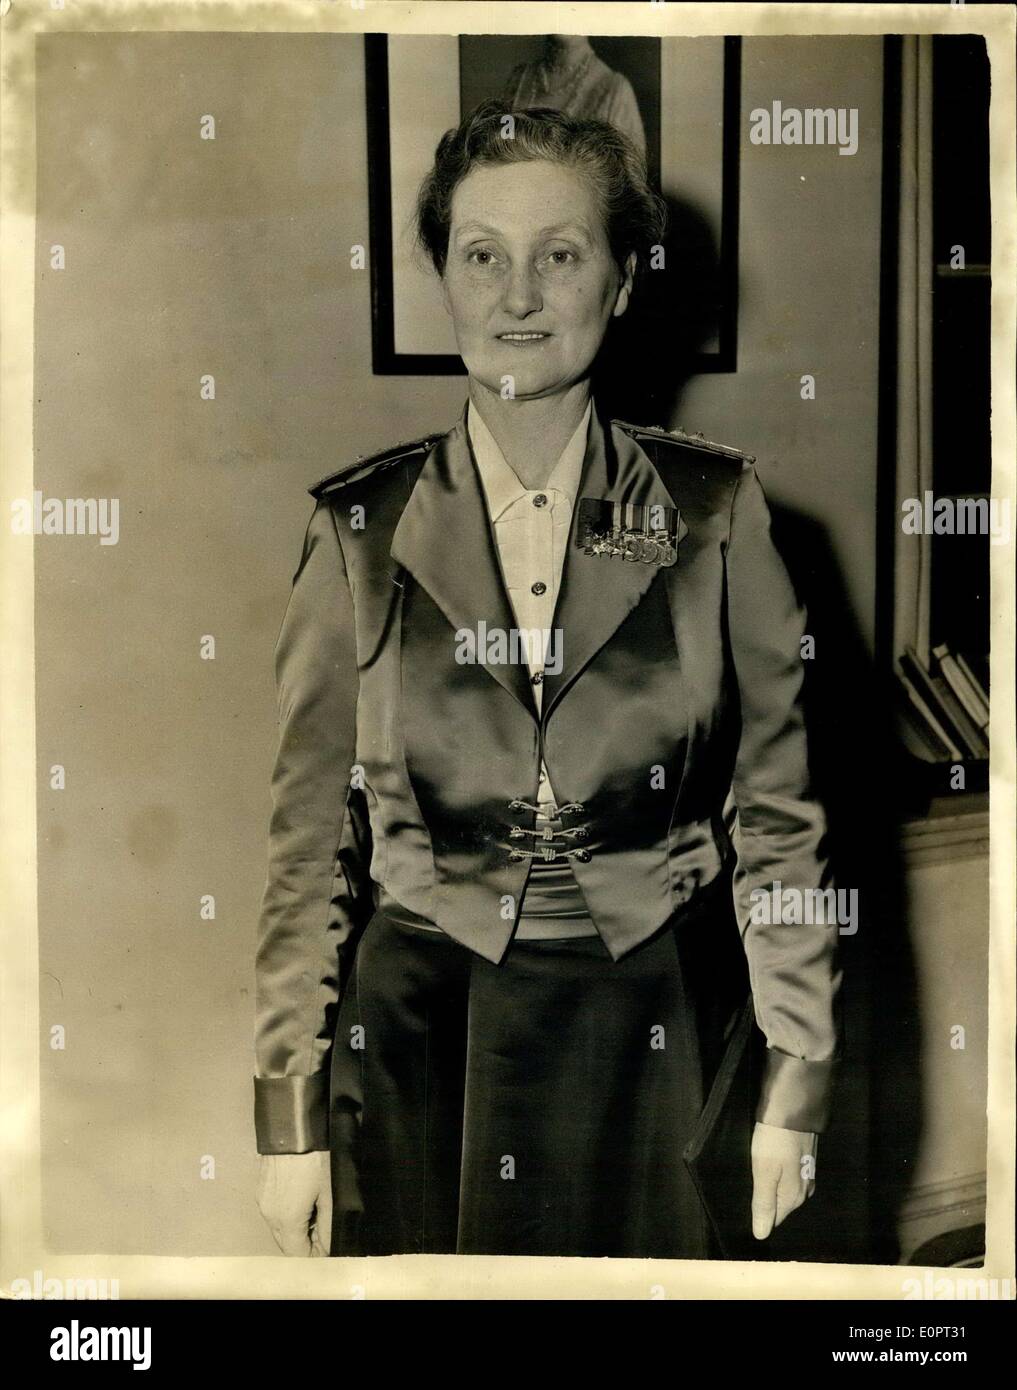 Dec. 10, 1956 - New Mess Dress For Officers Of The Queen Alexandra's Royal Army Nursing Corps.: Brigadier C.M. Johnson, RRC QHNS, Matrons in chief and Director of Army Nursing Services was to be seen at Lansdowne House this morning wearing the newly designed Mess Dress for officers-of the Queen Alexandra's Royal Army Nursing Corps..The dress consists of a black satin skirt; white Terylene Ninon blouse with long sleeves and plain tailored collar - and a scarlet jacket. Photo Shows Close-up of Brigadier C.M. Johnson in the new Mess Drwos at Landowne House this morning. Stock Photo